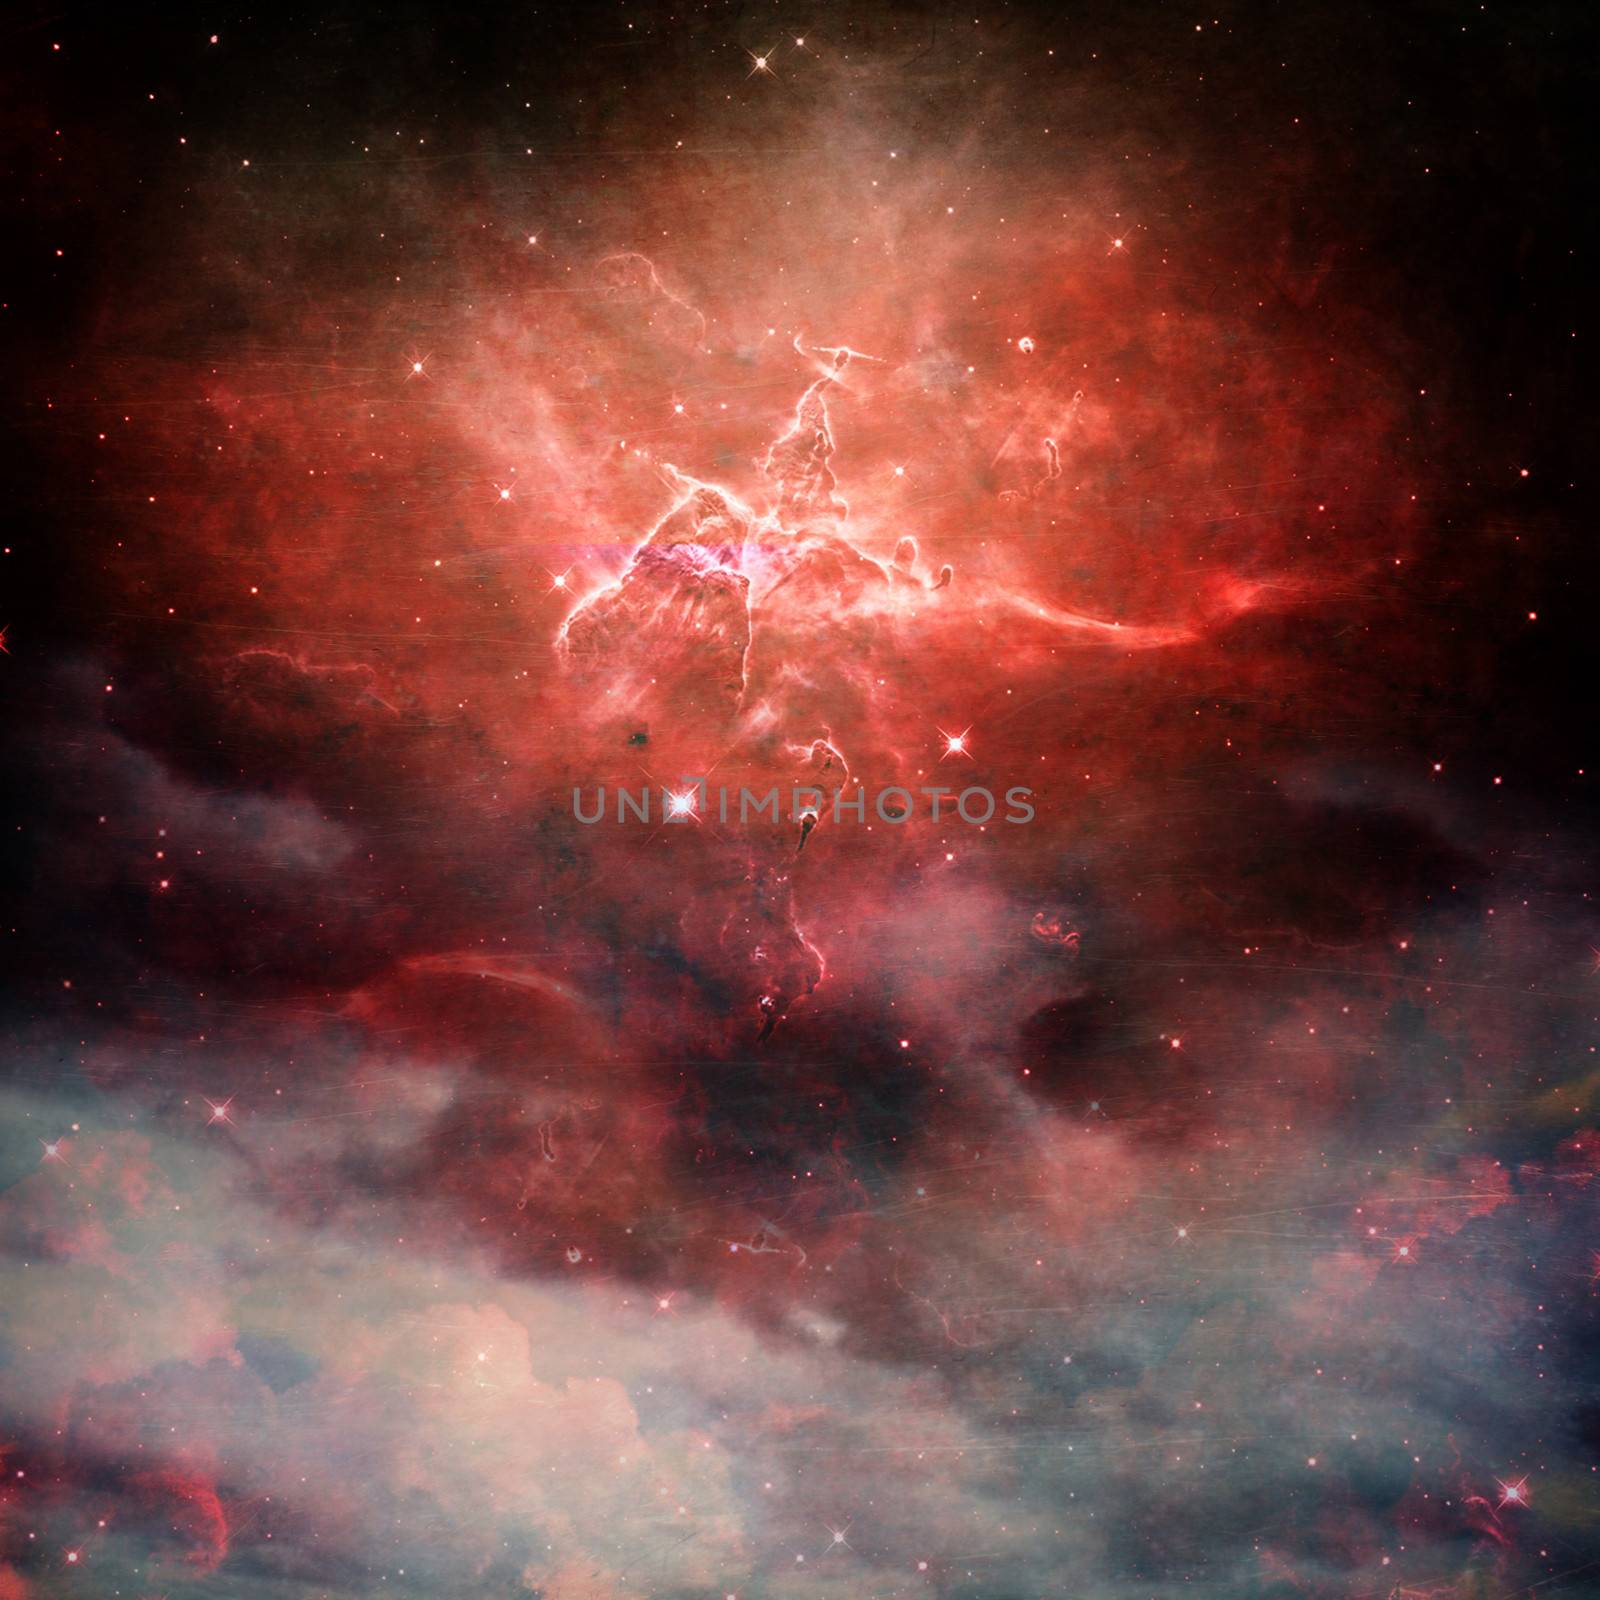 A star field in space with red nebulaes with copy space. Collage created with use from some images from images from www.nasa.gov